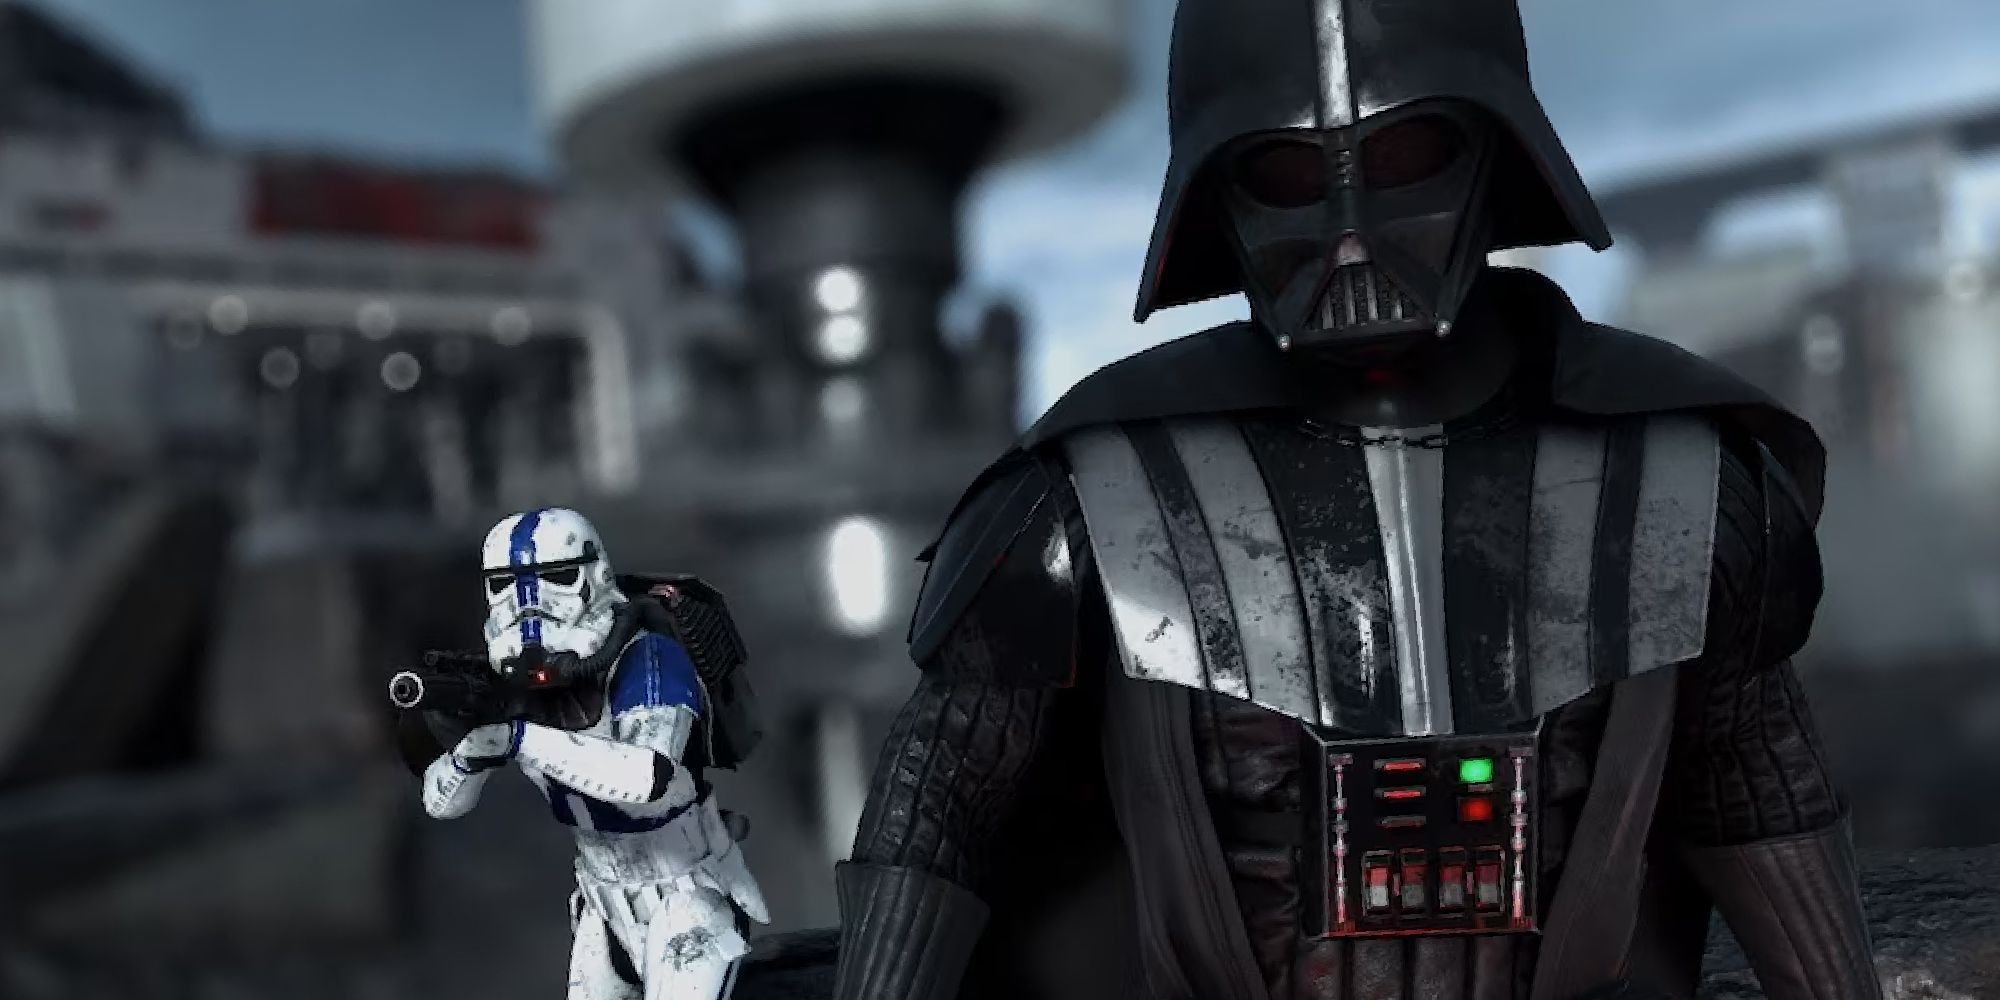 Battlefront 2015 screenshot from the store page showing Darth Vader next to a Storm Trooper with blue accents pointing a blaster